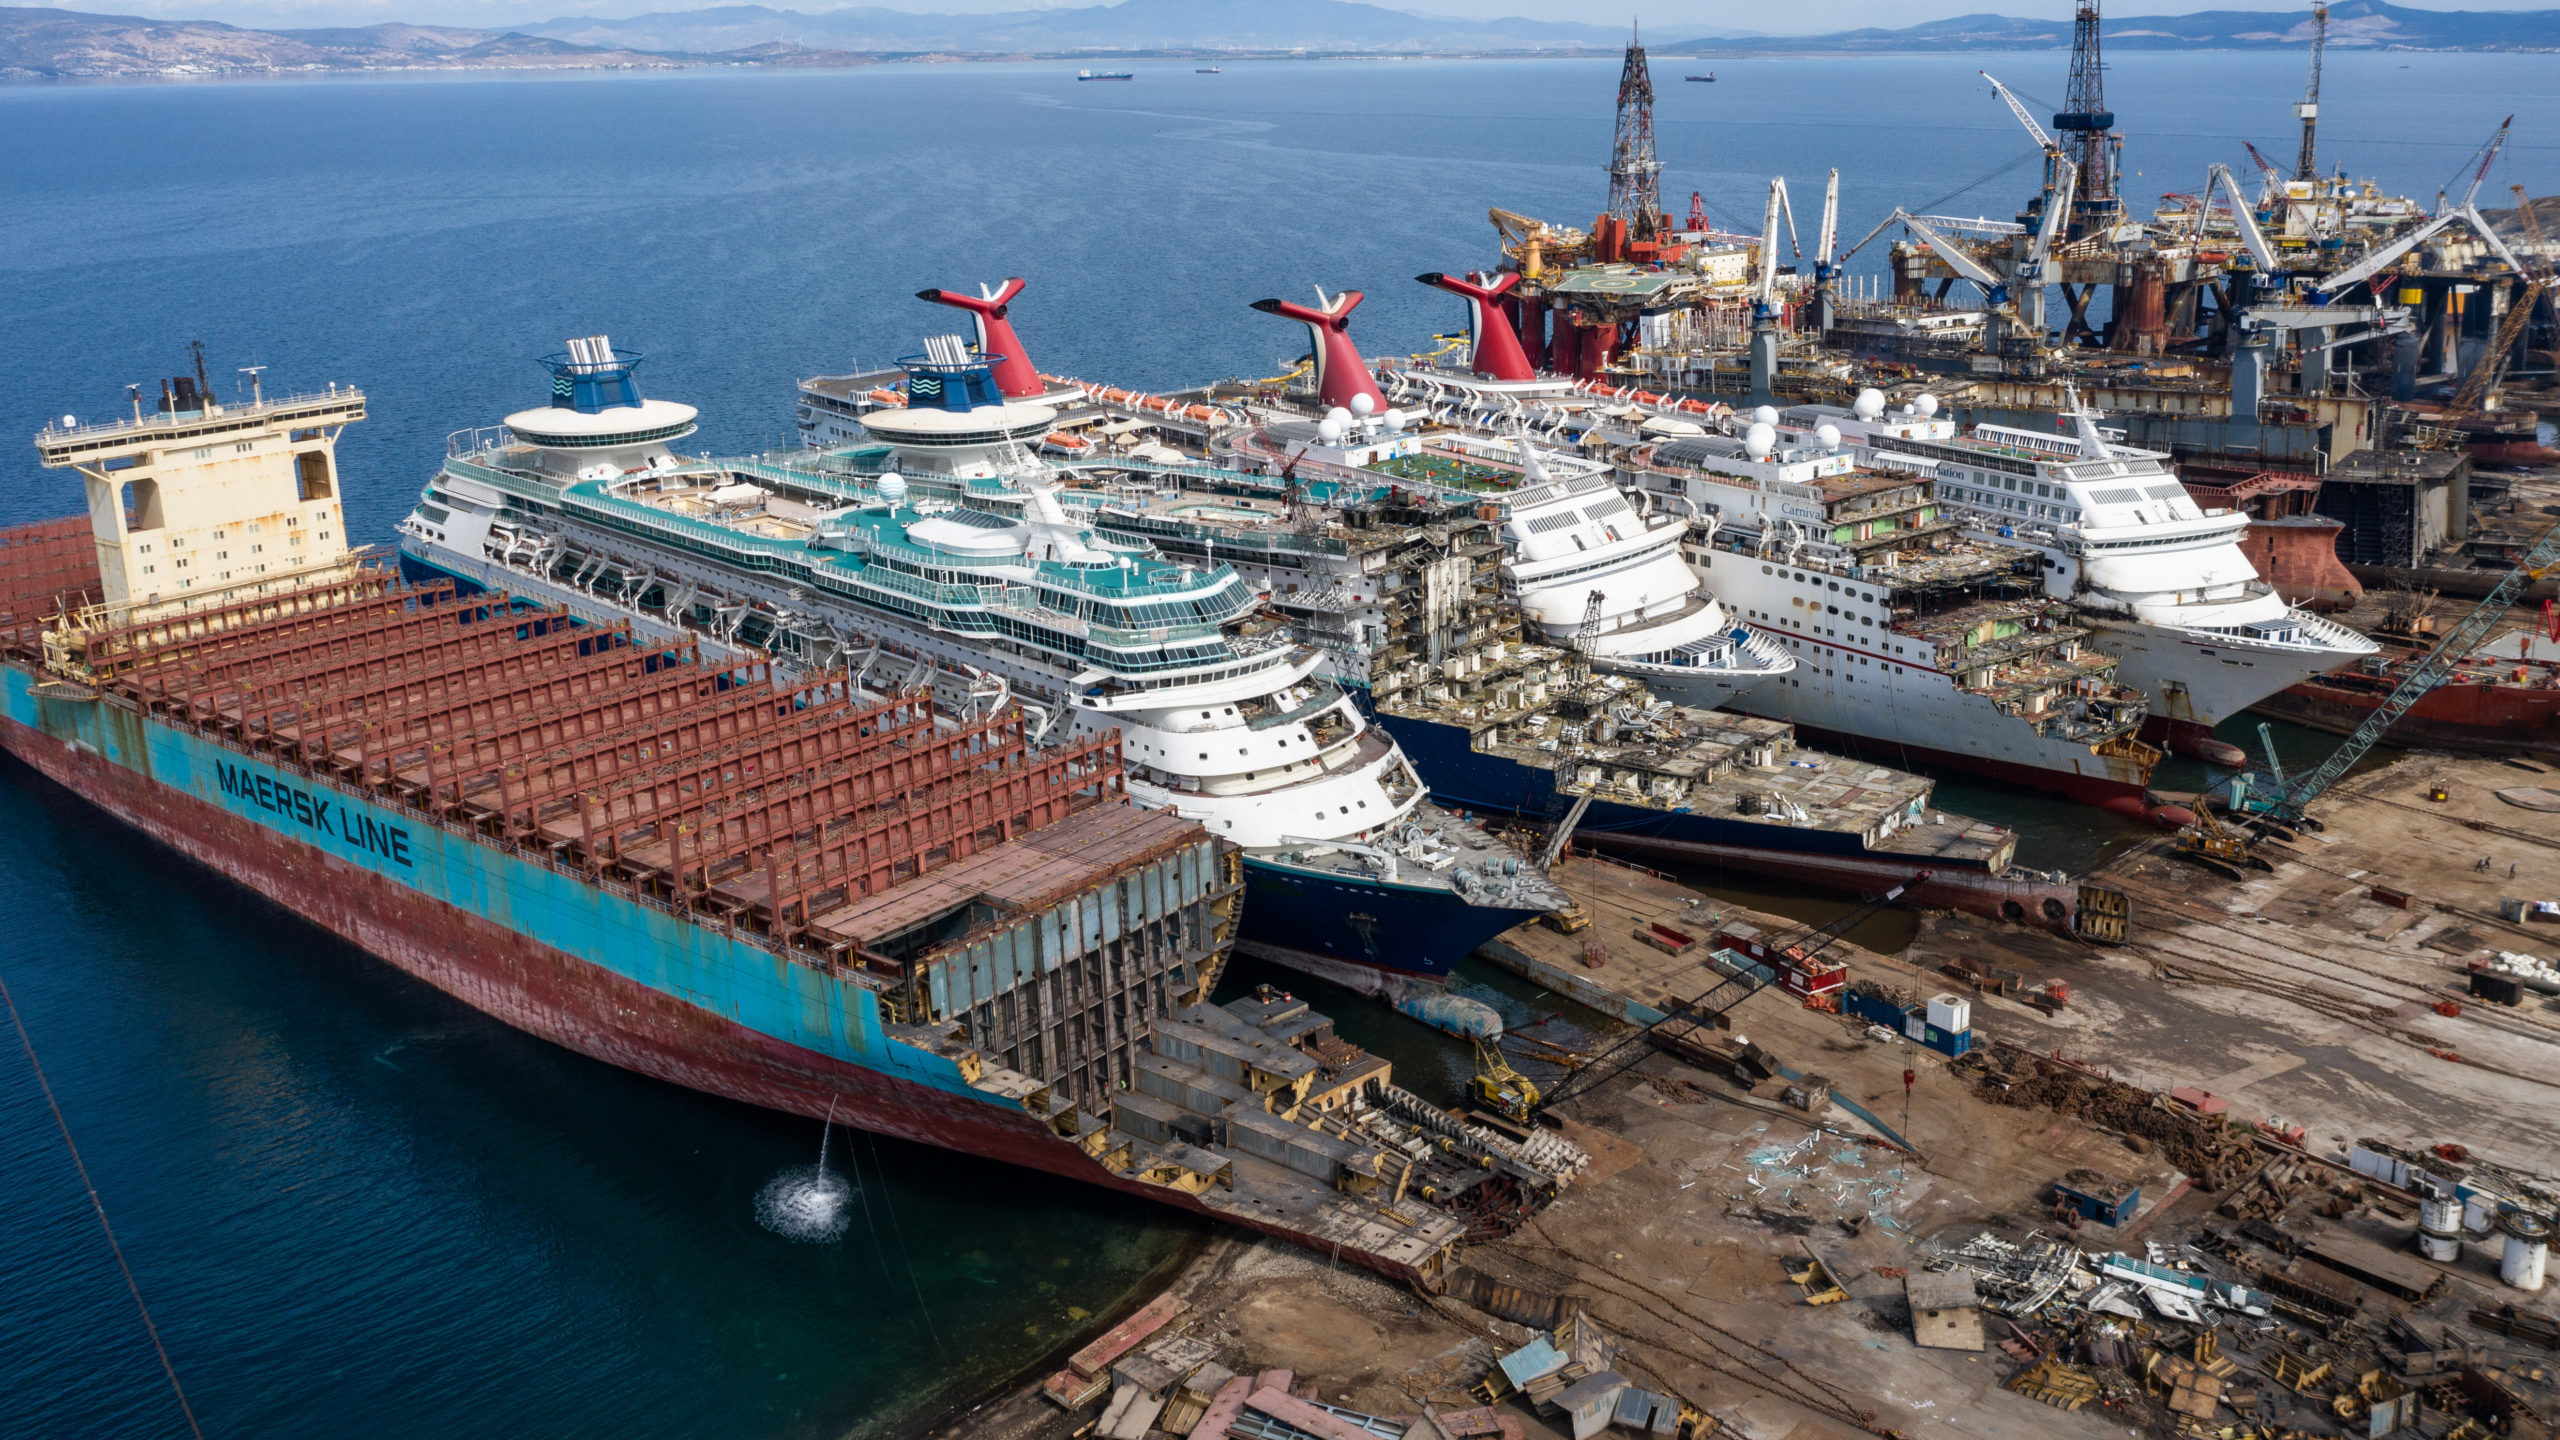 The crisis however has bolstered the years intake of ships at the Aliaga ship recycling port with business up thirty per cent on the previous year.  (Photo: Chris McGrath, Getty Images)